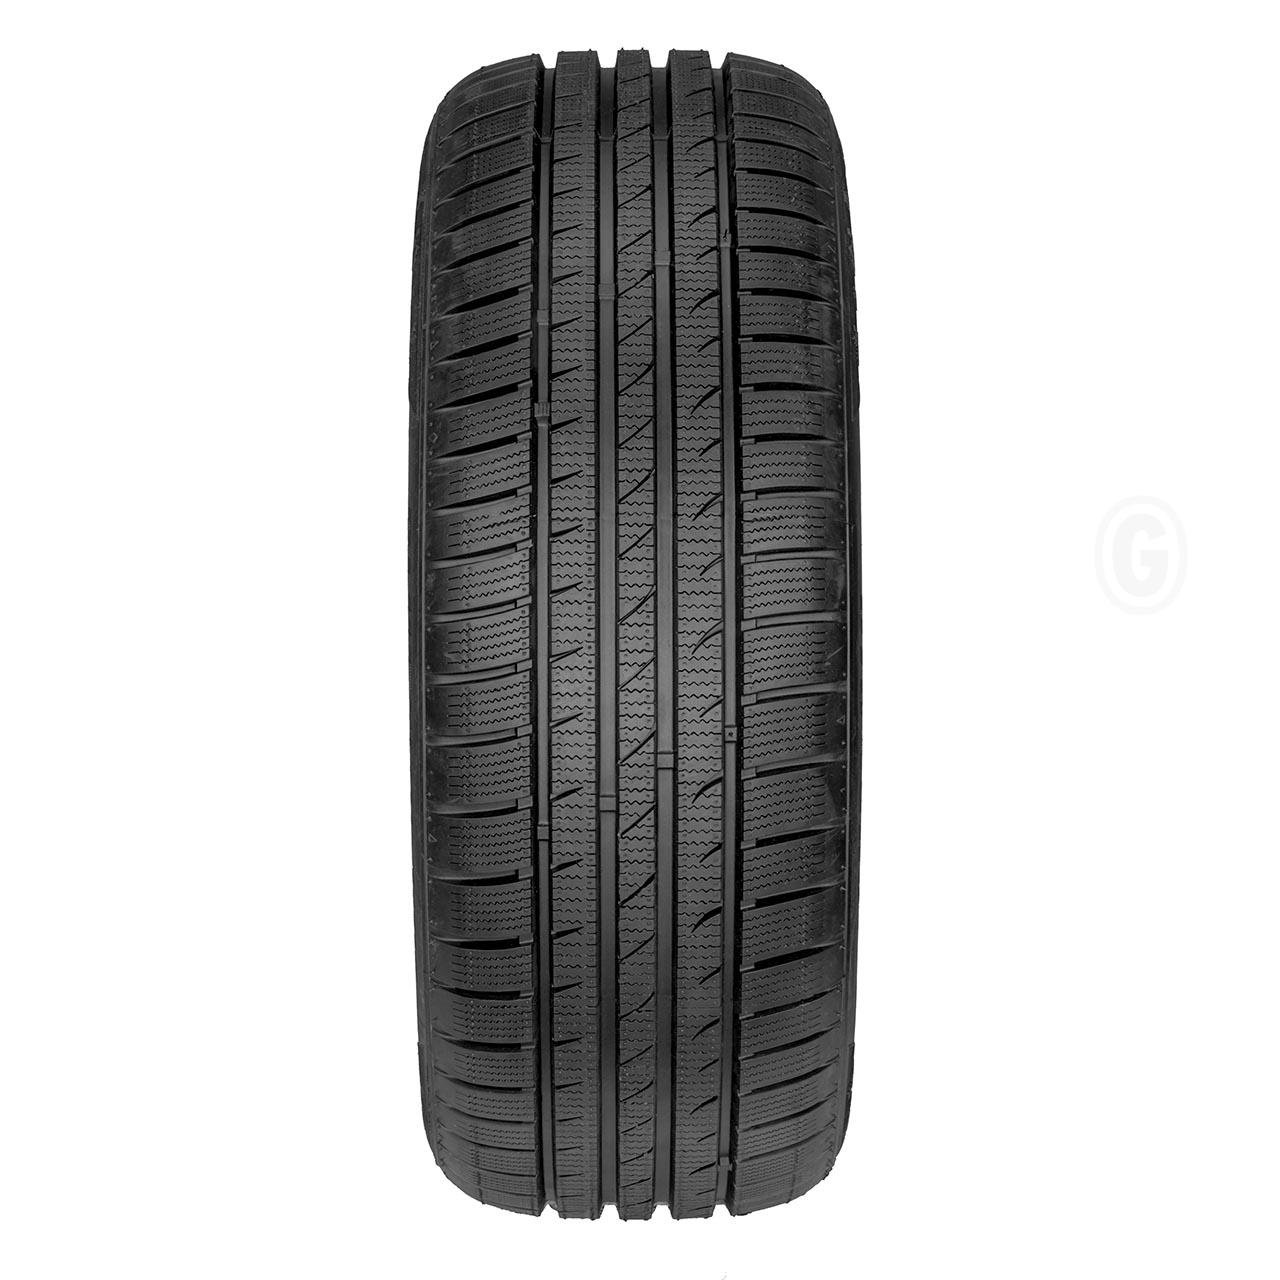 Fortuna Gowin UHP 215/50R17 95V XL